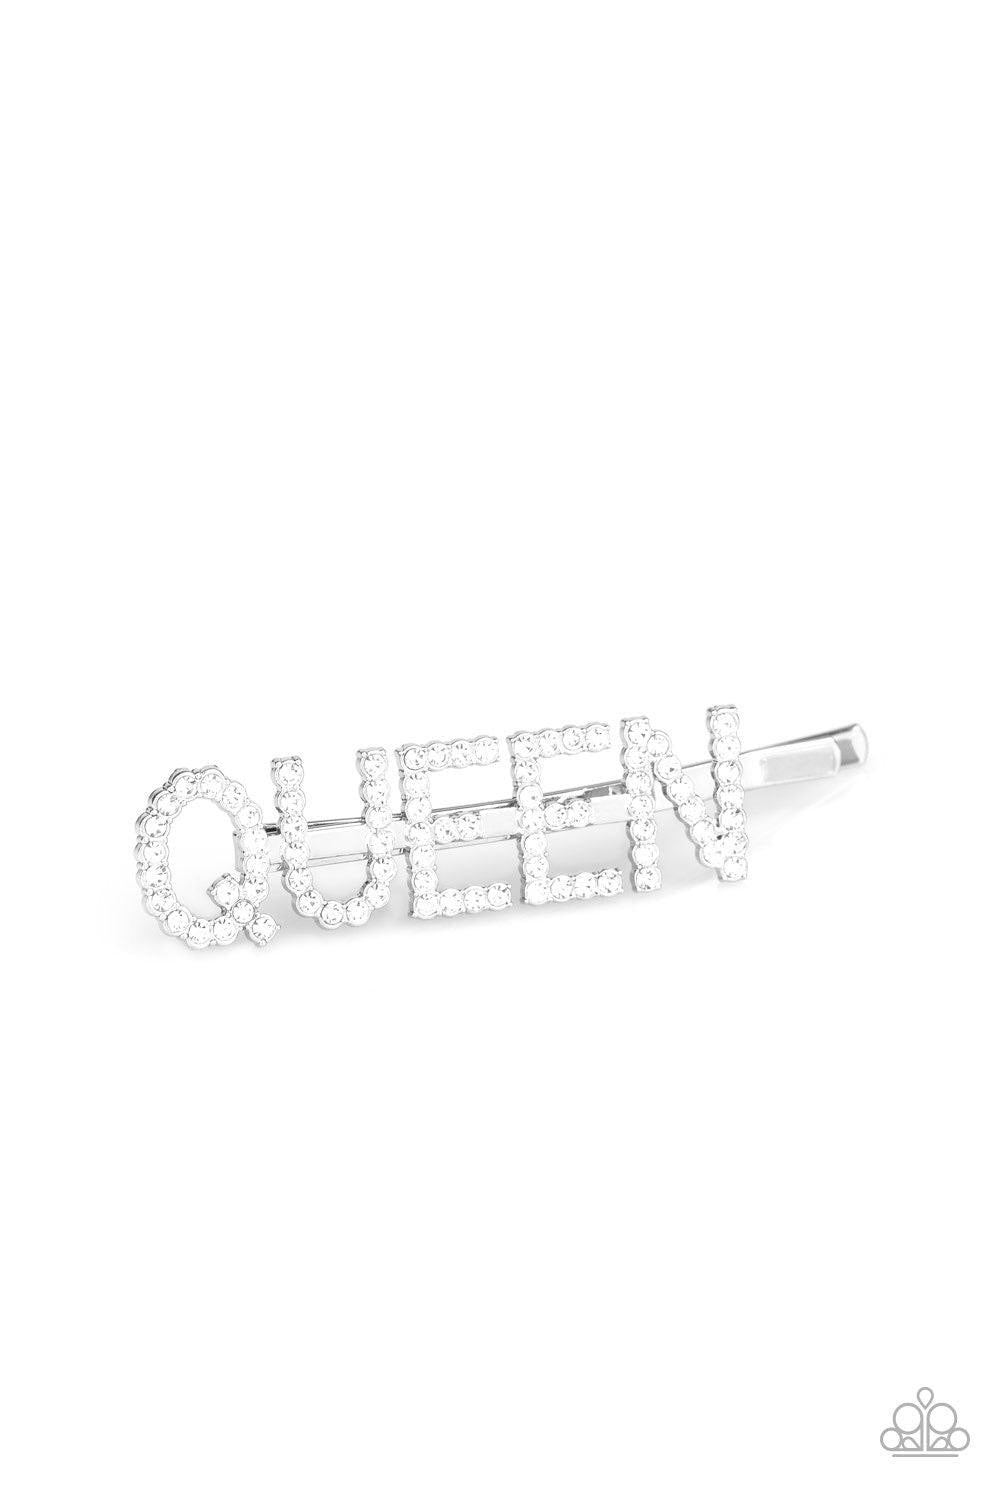 Paparazzi Accessories It’s A Hair Up Kinda Day - White White rhinestone encrusted letters spell out, "QUEEN," across the front of a classic bobby pin for a glamorous look. Sold as one individual decorative bobby pin. Hair Accessories